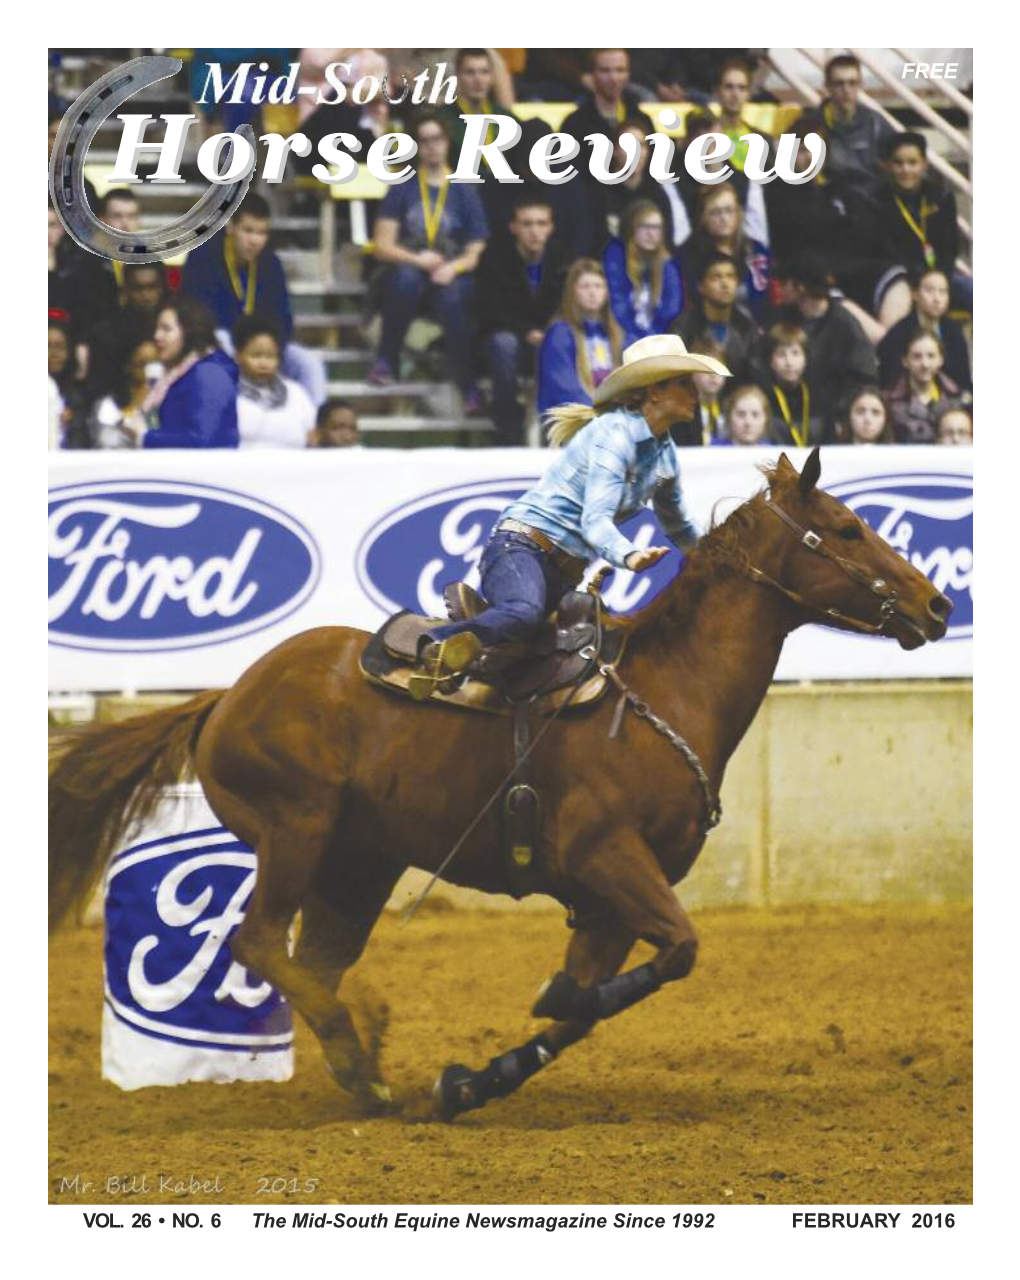 VOL. 26 • NO. 6 the Mid-South Equine Newsmagazine Since 1992 FEBRUARY 2016 2